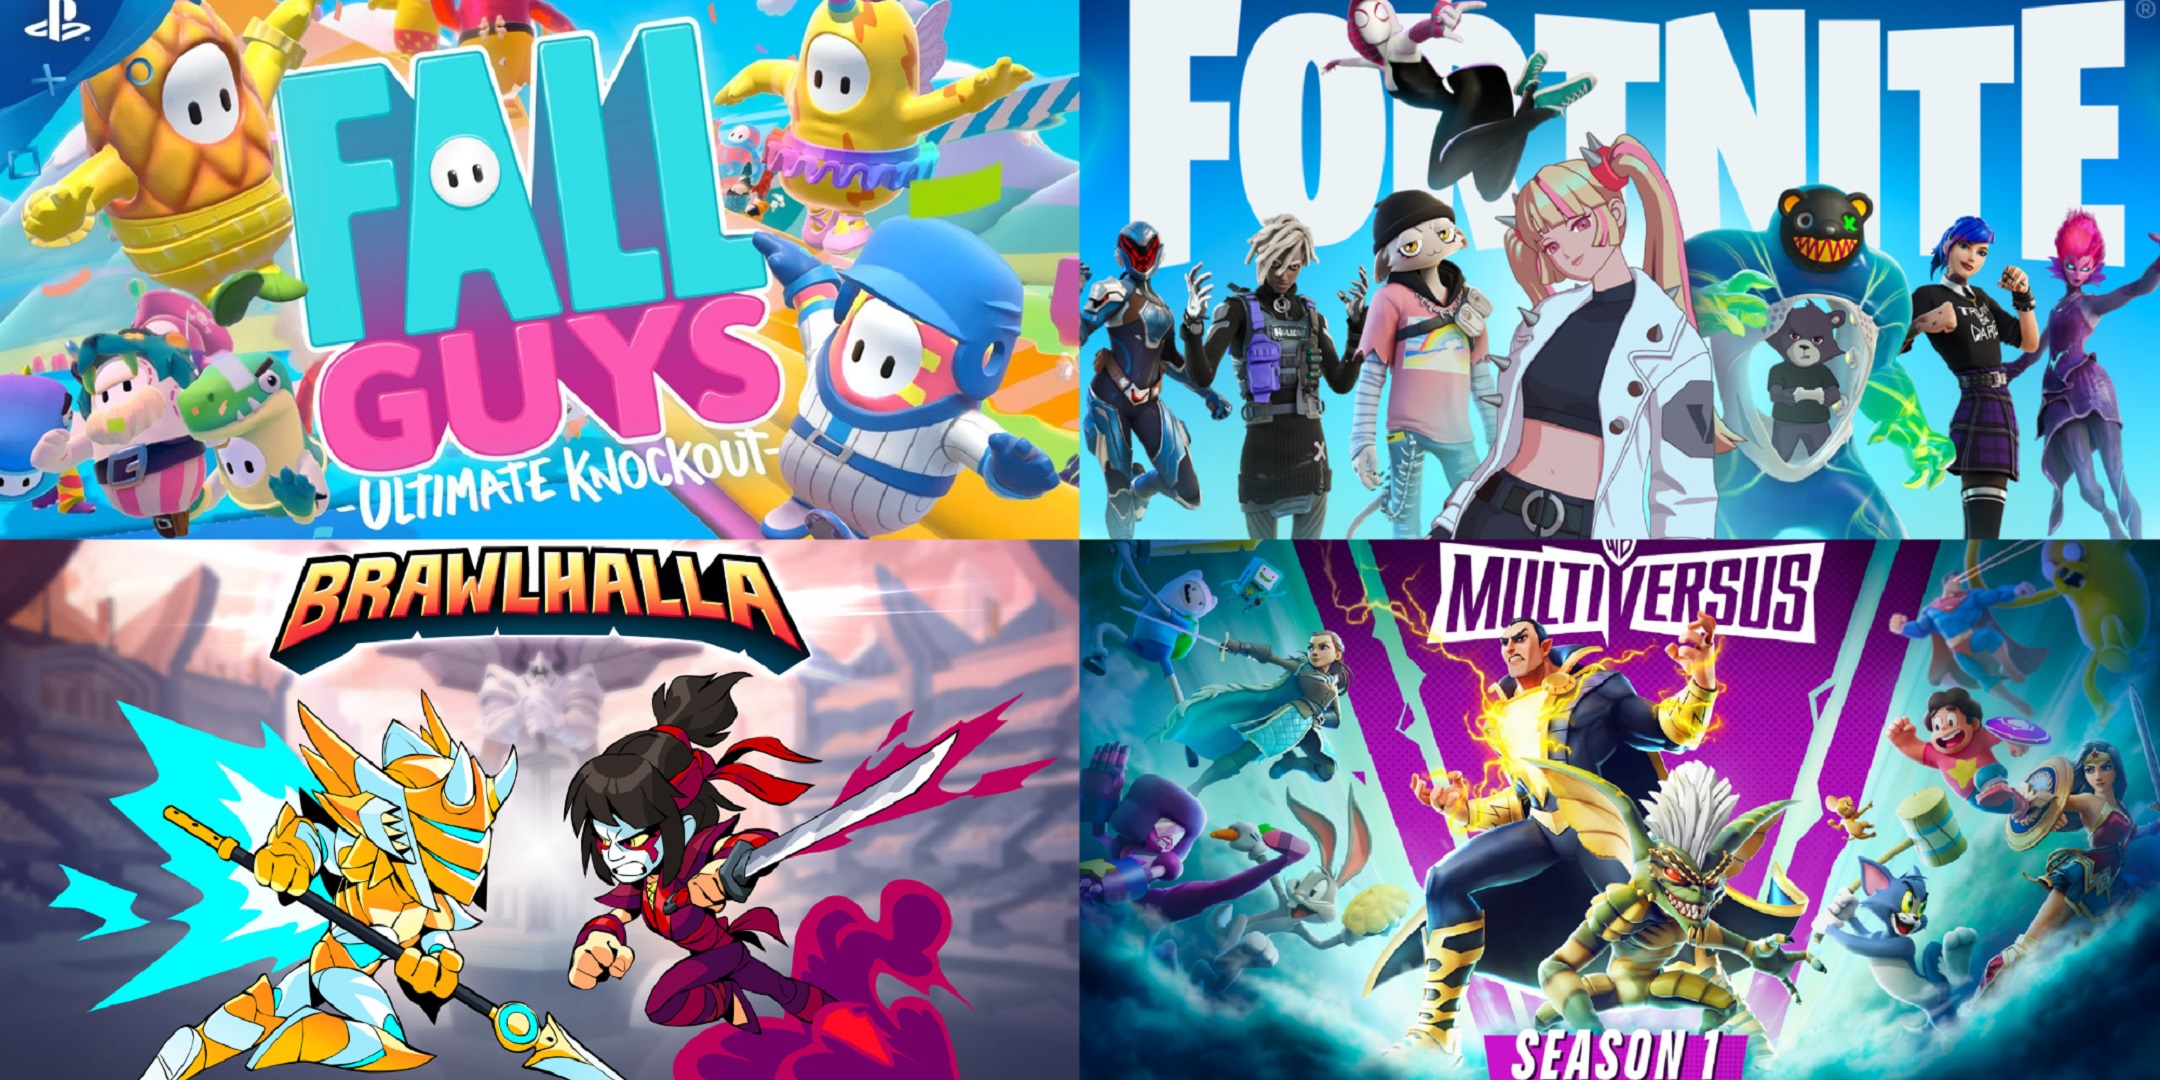 Ansvarlige person gullig vil gøre Best Cross-platform games to play this year 2022 - Ranked